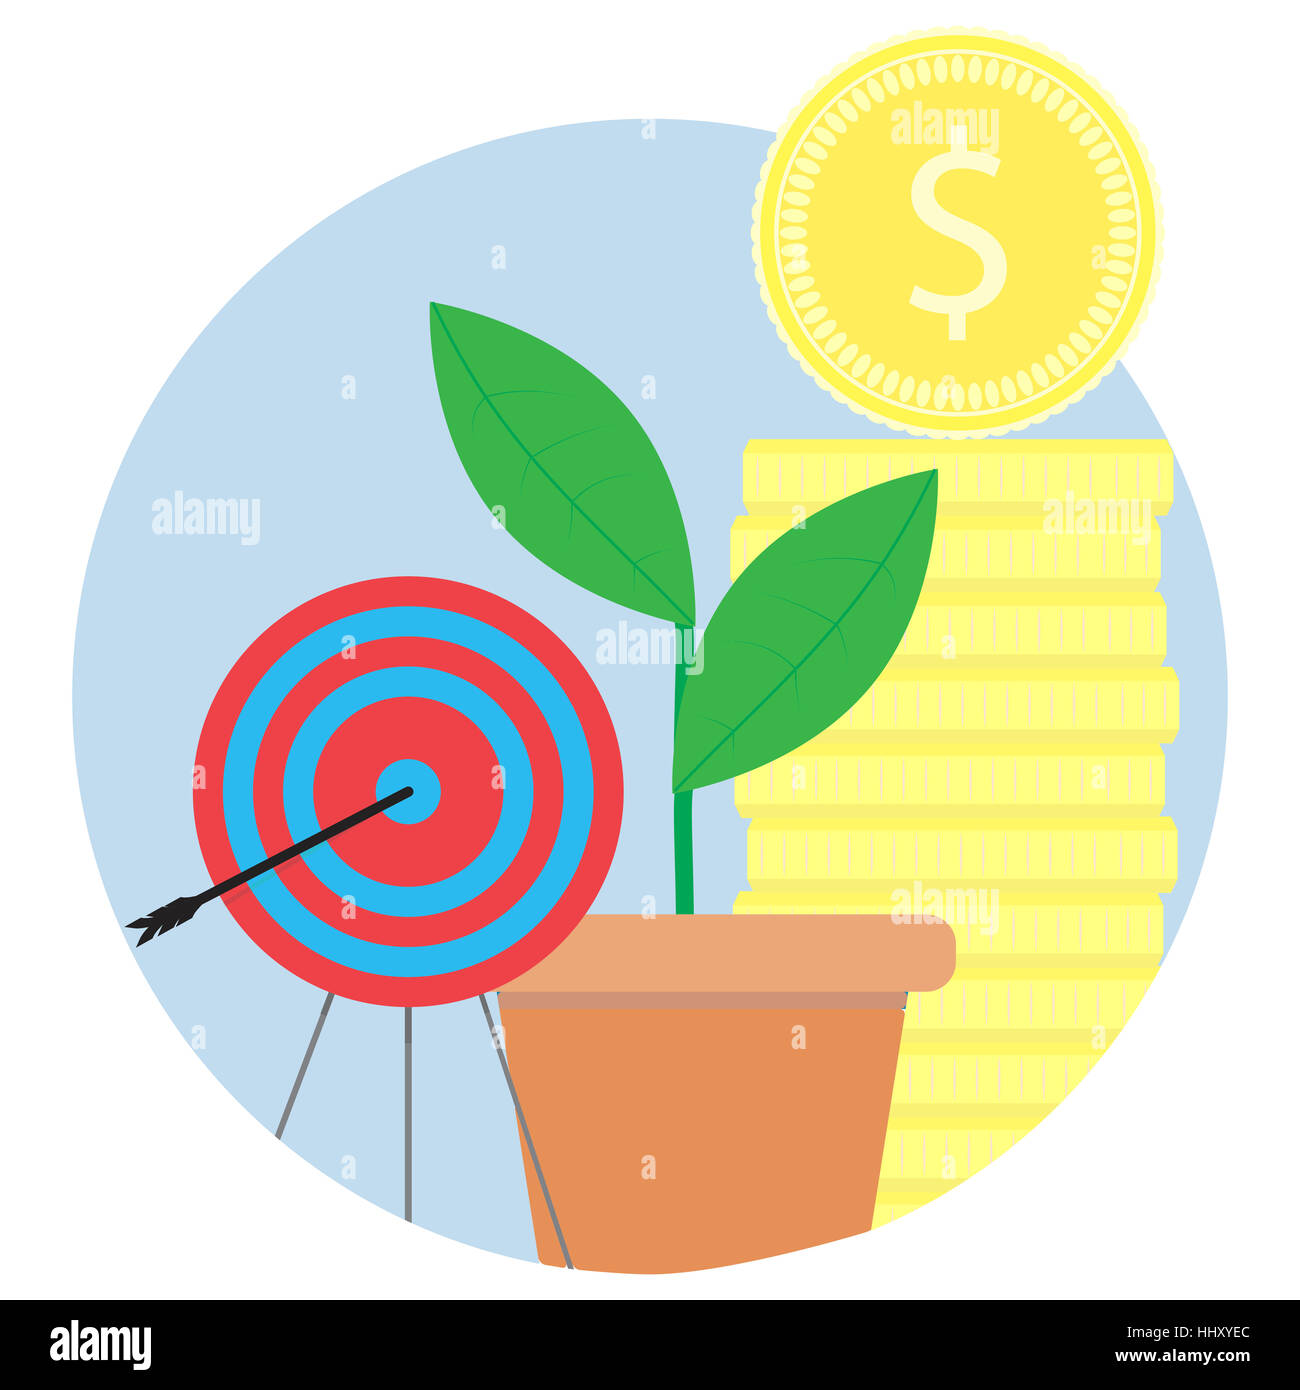 Financial success, achieving goals vector icon. Gold coin stack and sprout grow illustration Stock Photo